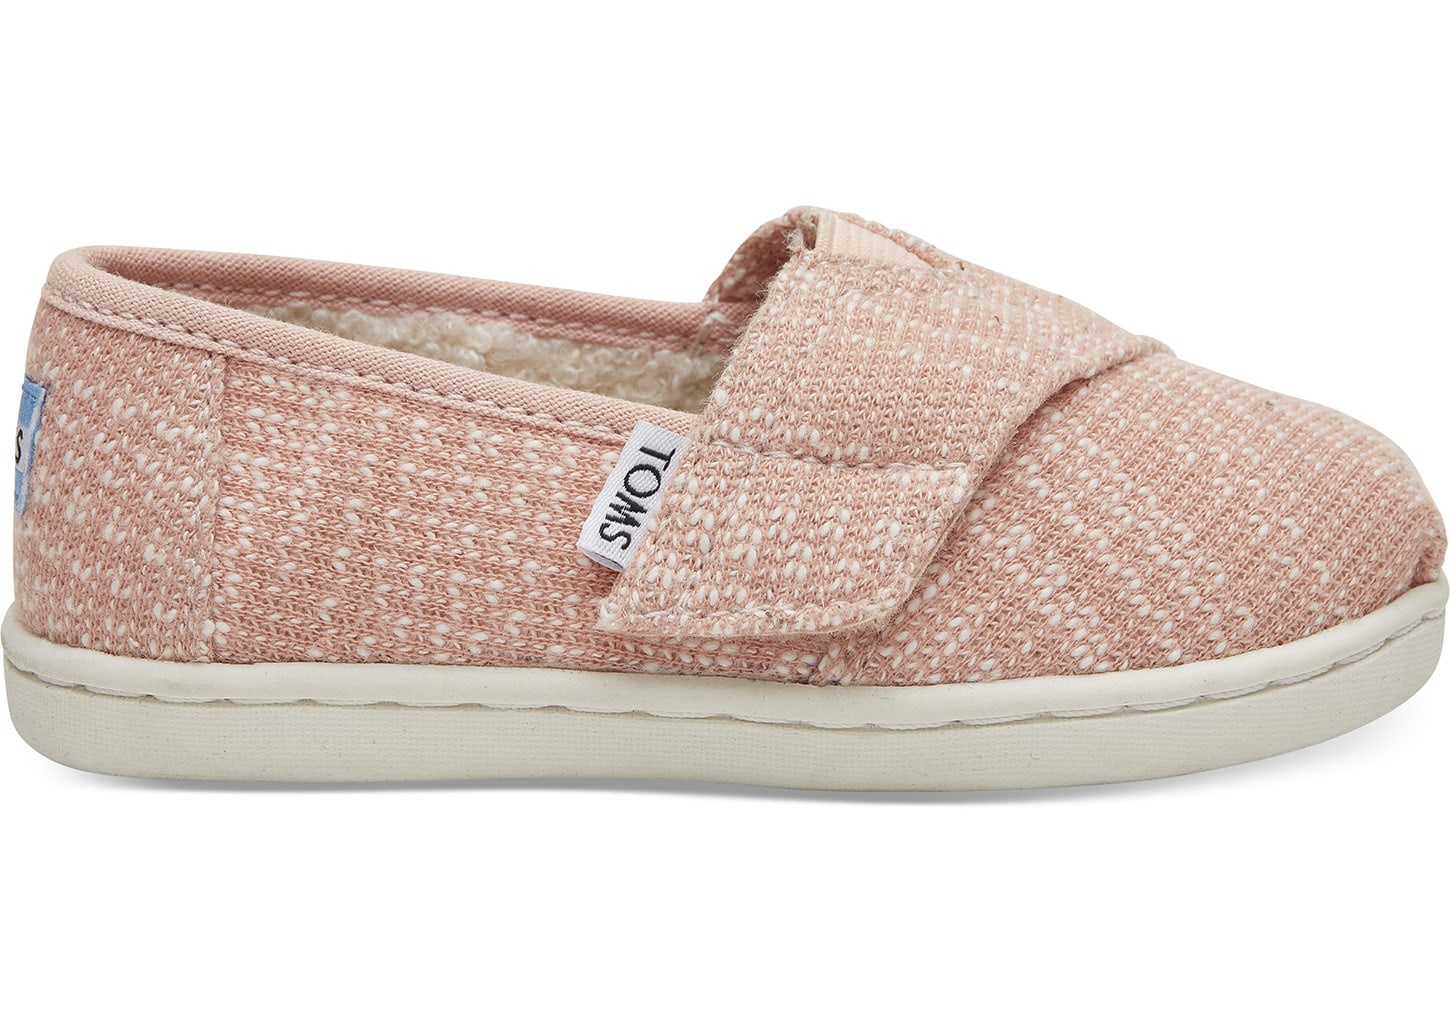 shearling lined toms